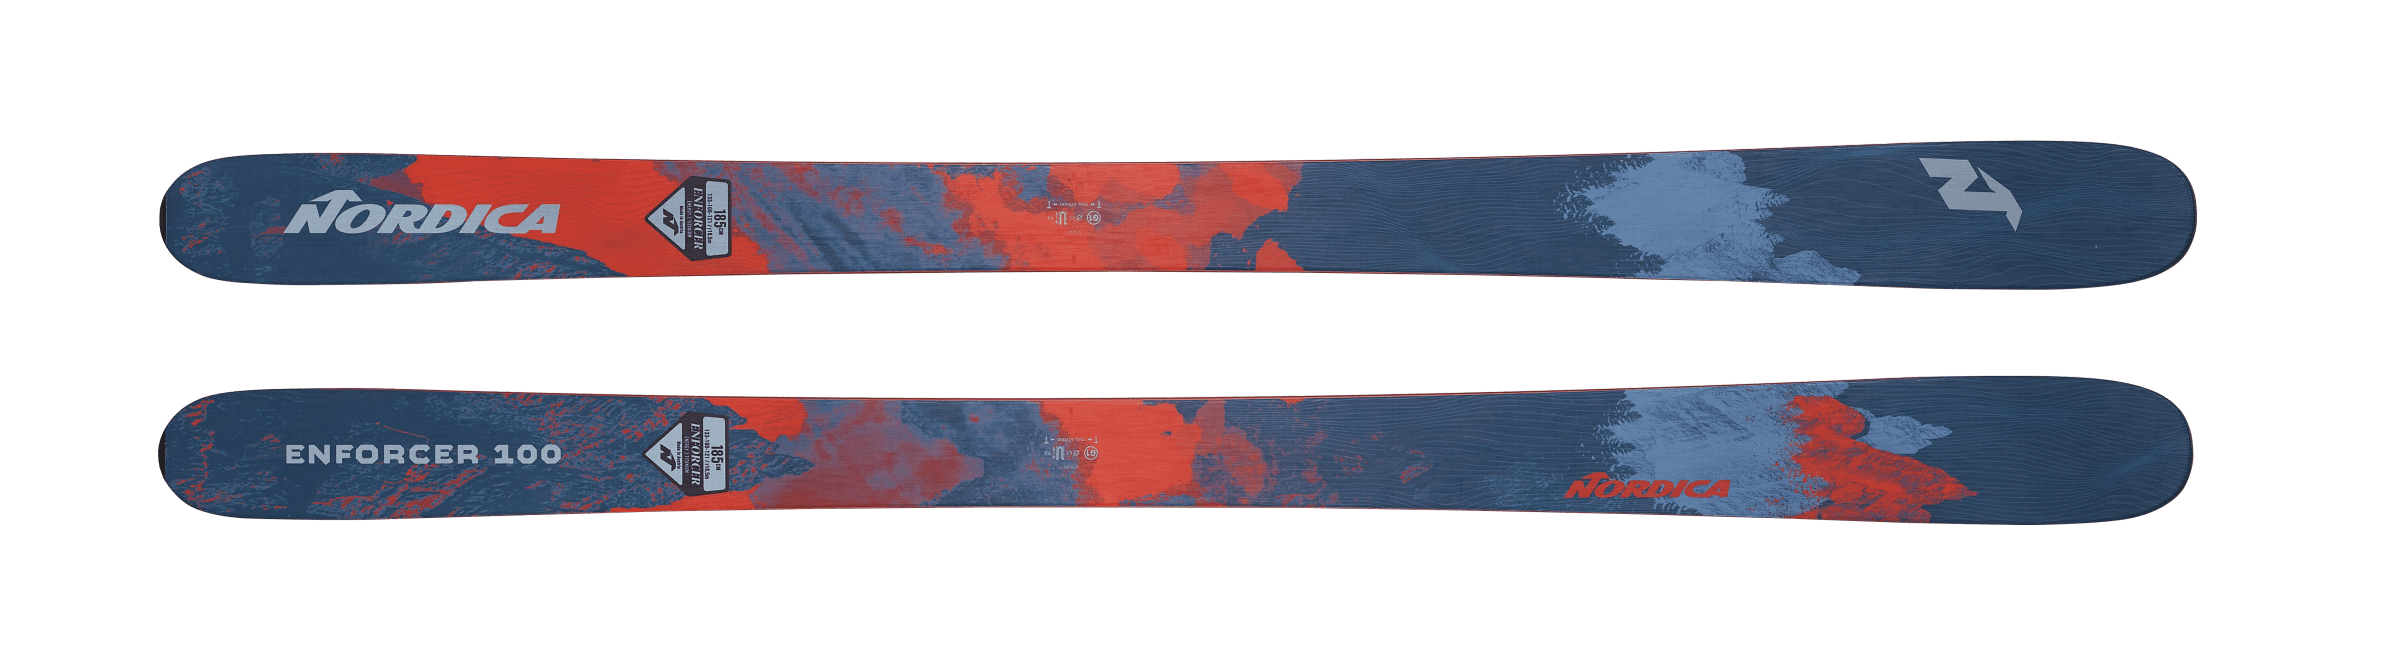 SKI TEST - SKI REVIEW #2 – Nordica Enforcer 100 SKI REVIEWS -FAT OR NOT FAT - WHAT TO BUY?